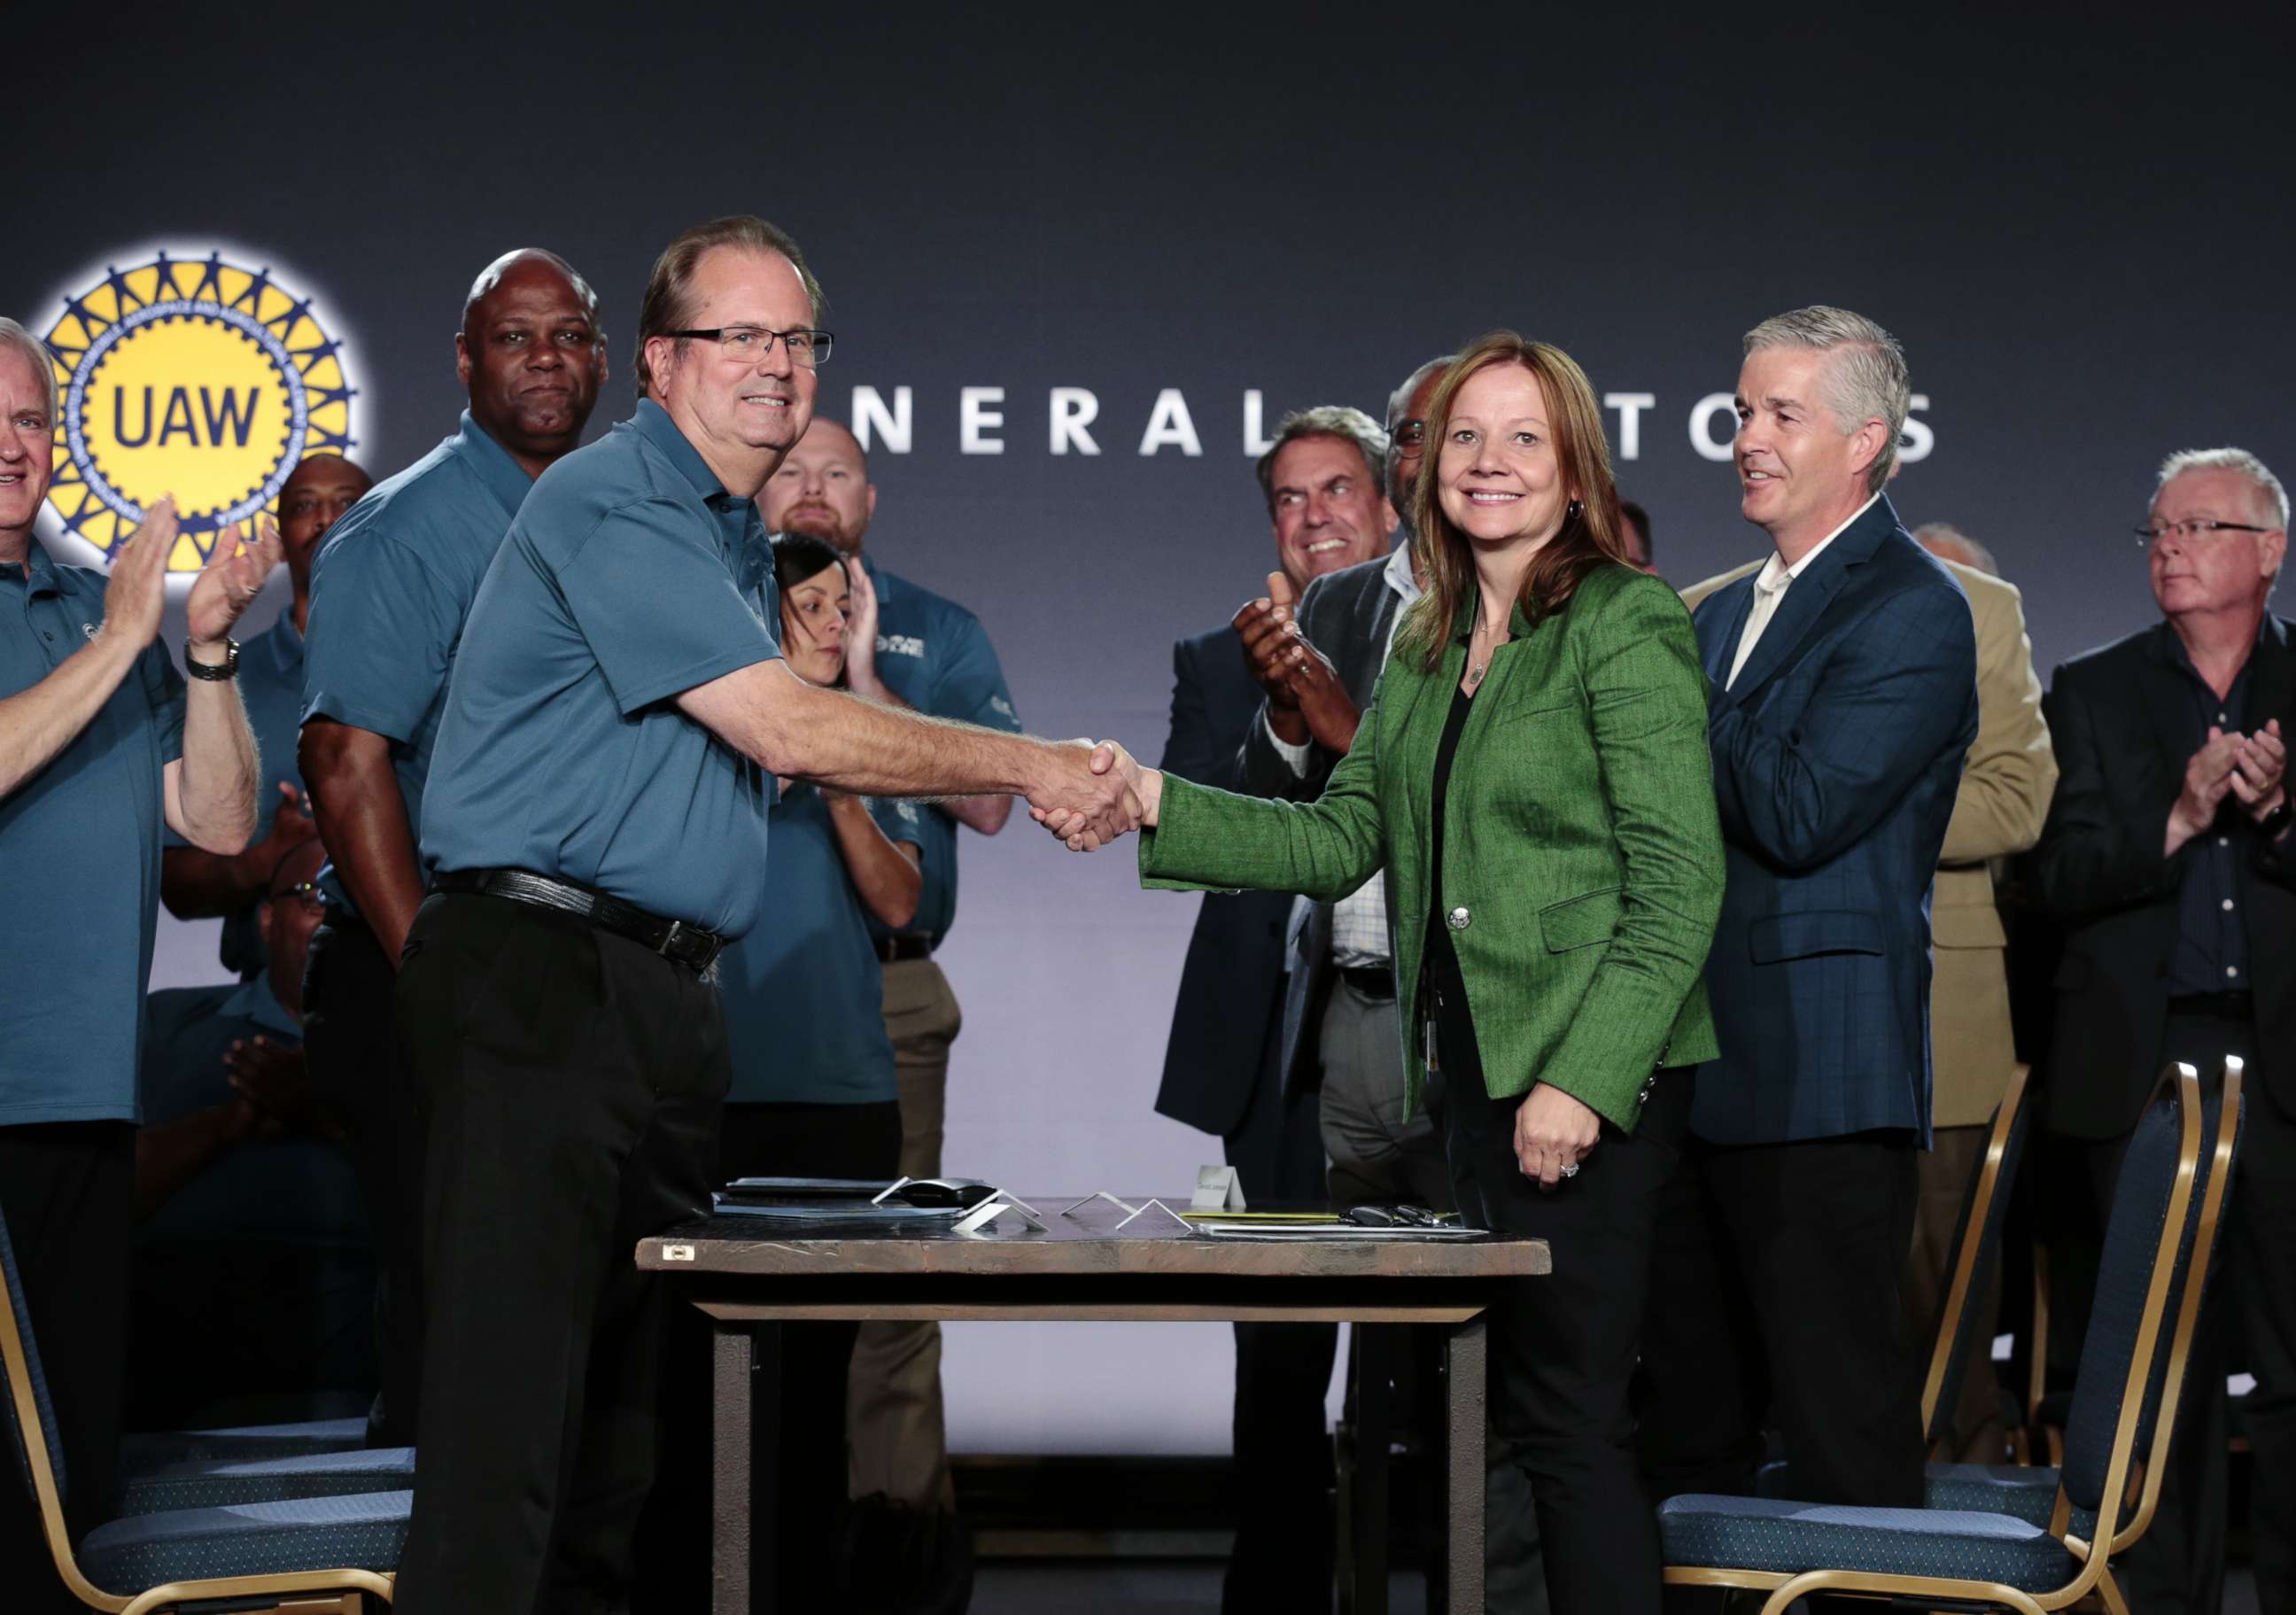 PHOTO: Mary Barra, Chairman and CEO of General Motors Co. and Gary Jones, president of the United Auto Workers, shake hands during a GM event at the Renaissance Center in Detroit, July 16, 2019.